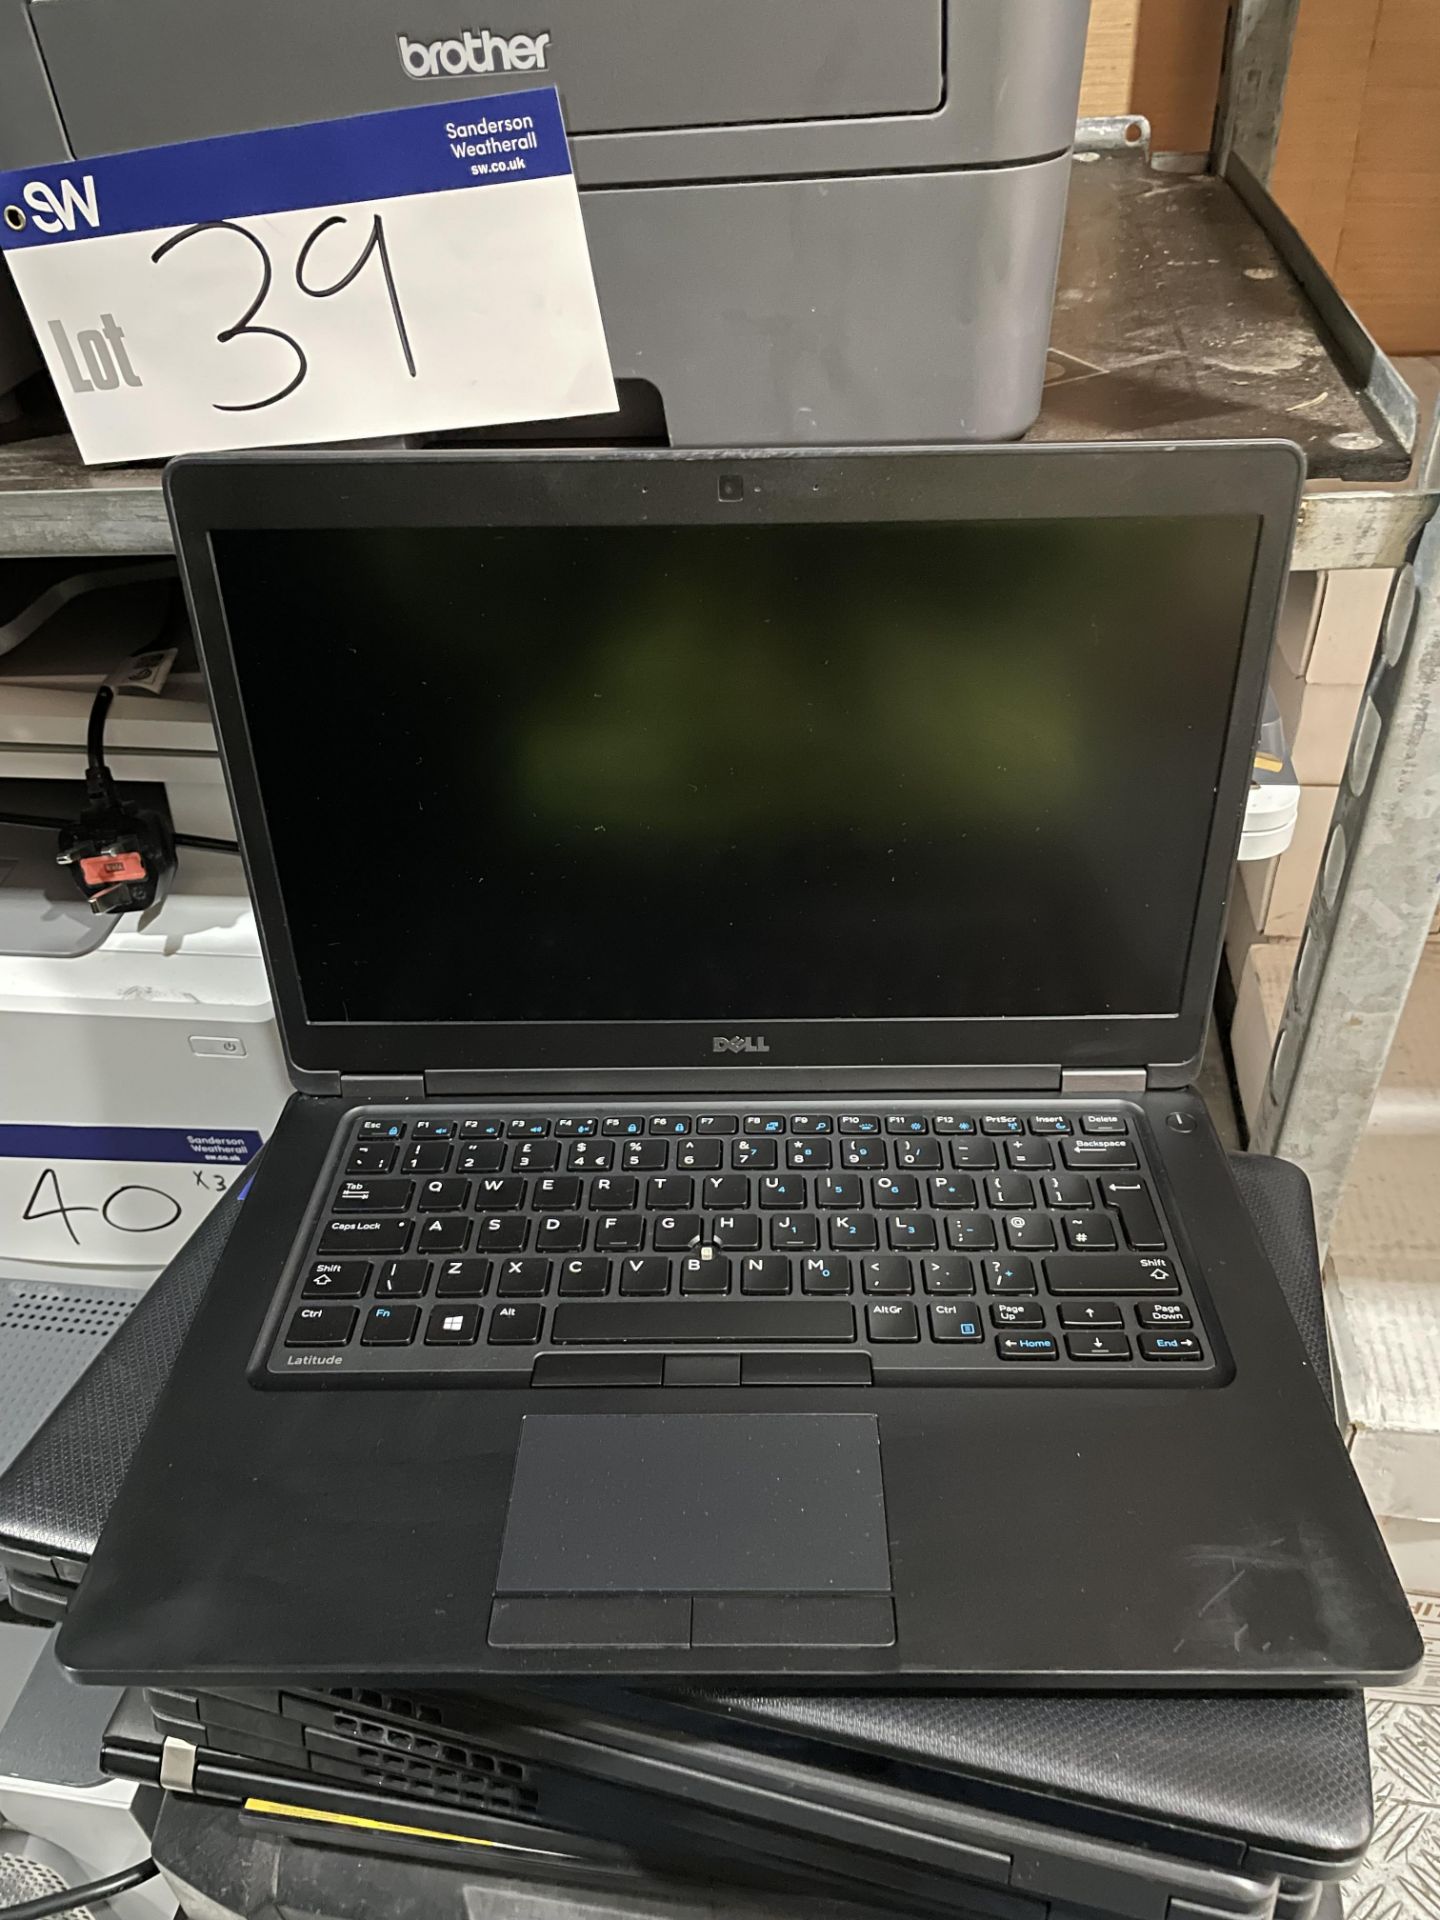 Dell Latitude 5480 Laptop (Hard Drive Wiped) Please read the following important notes:- ***Overseas